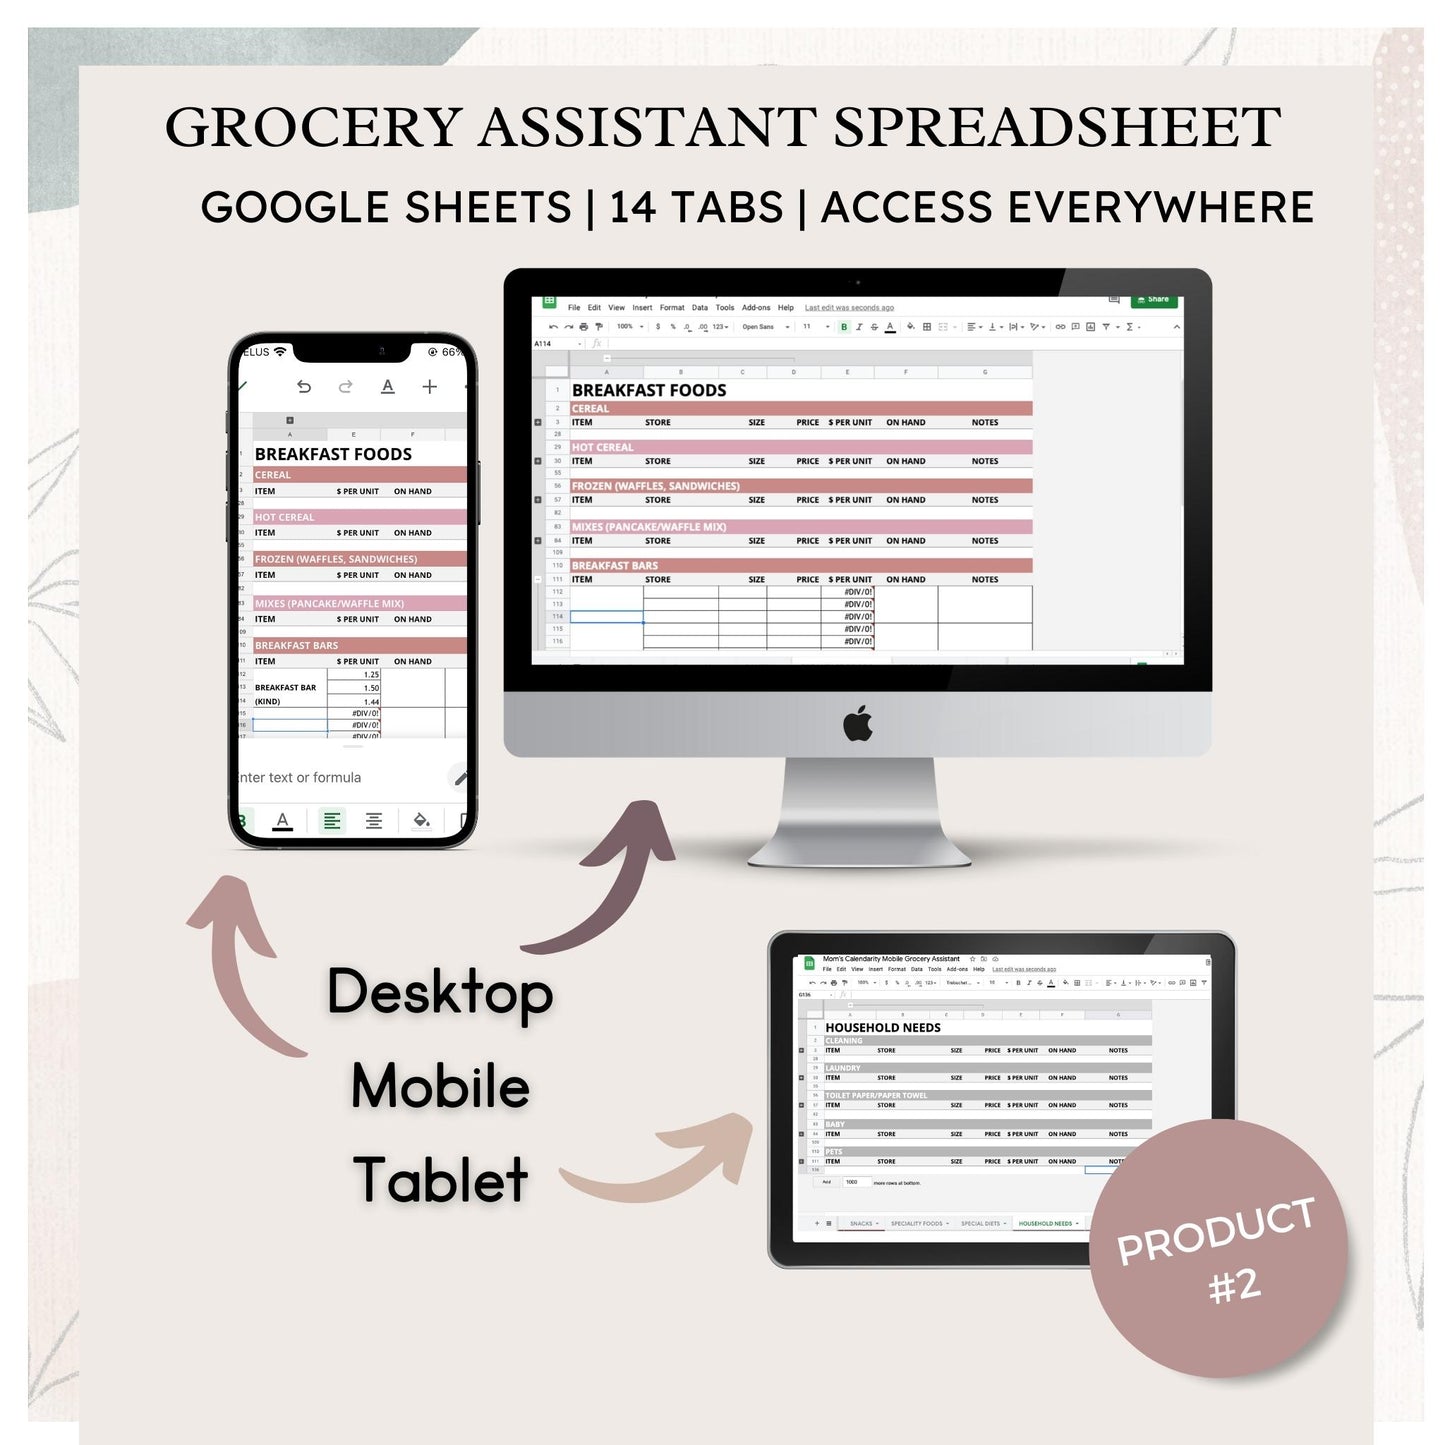 M.O.M Toolkit - Grocery Assistant